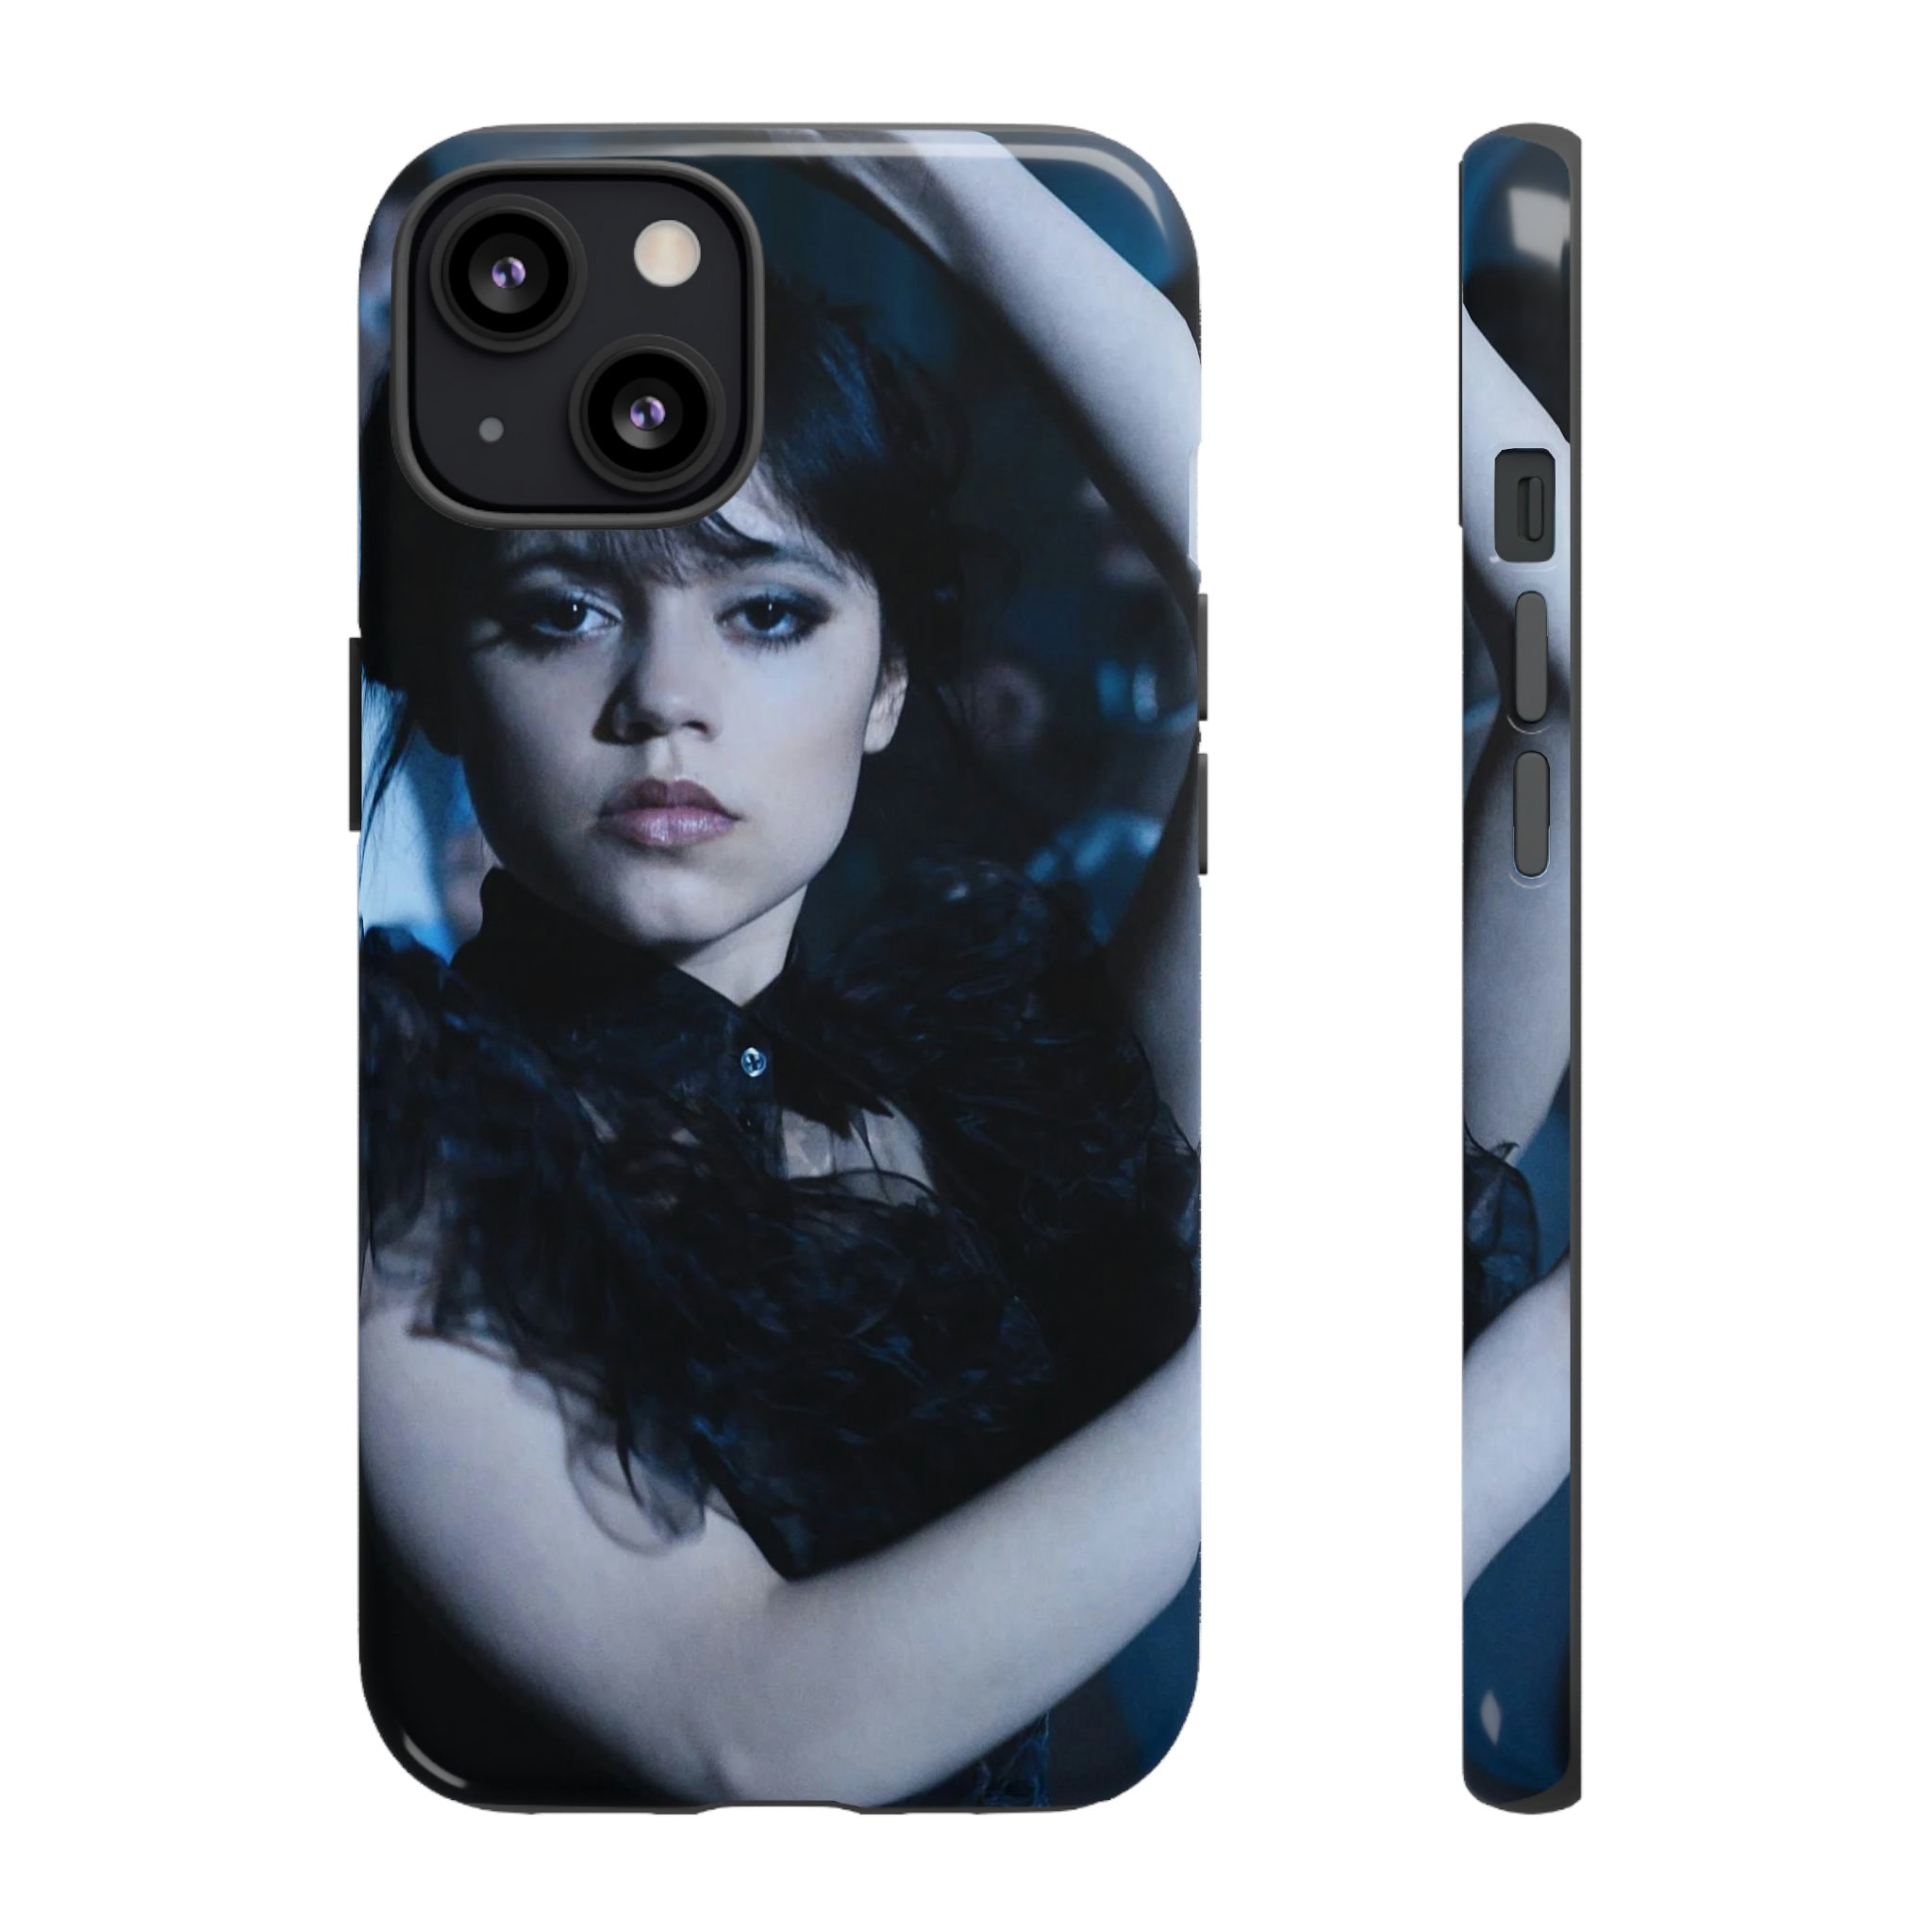 Discover Wednesday Dance phone case from Tough Cases